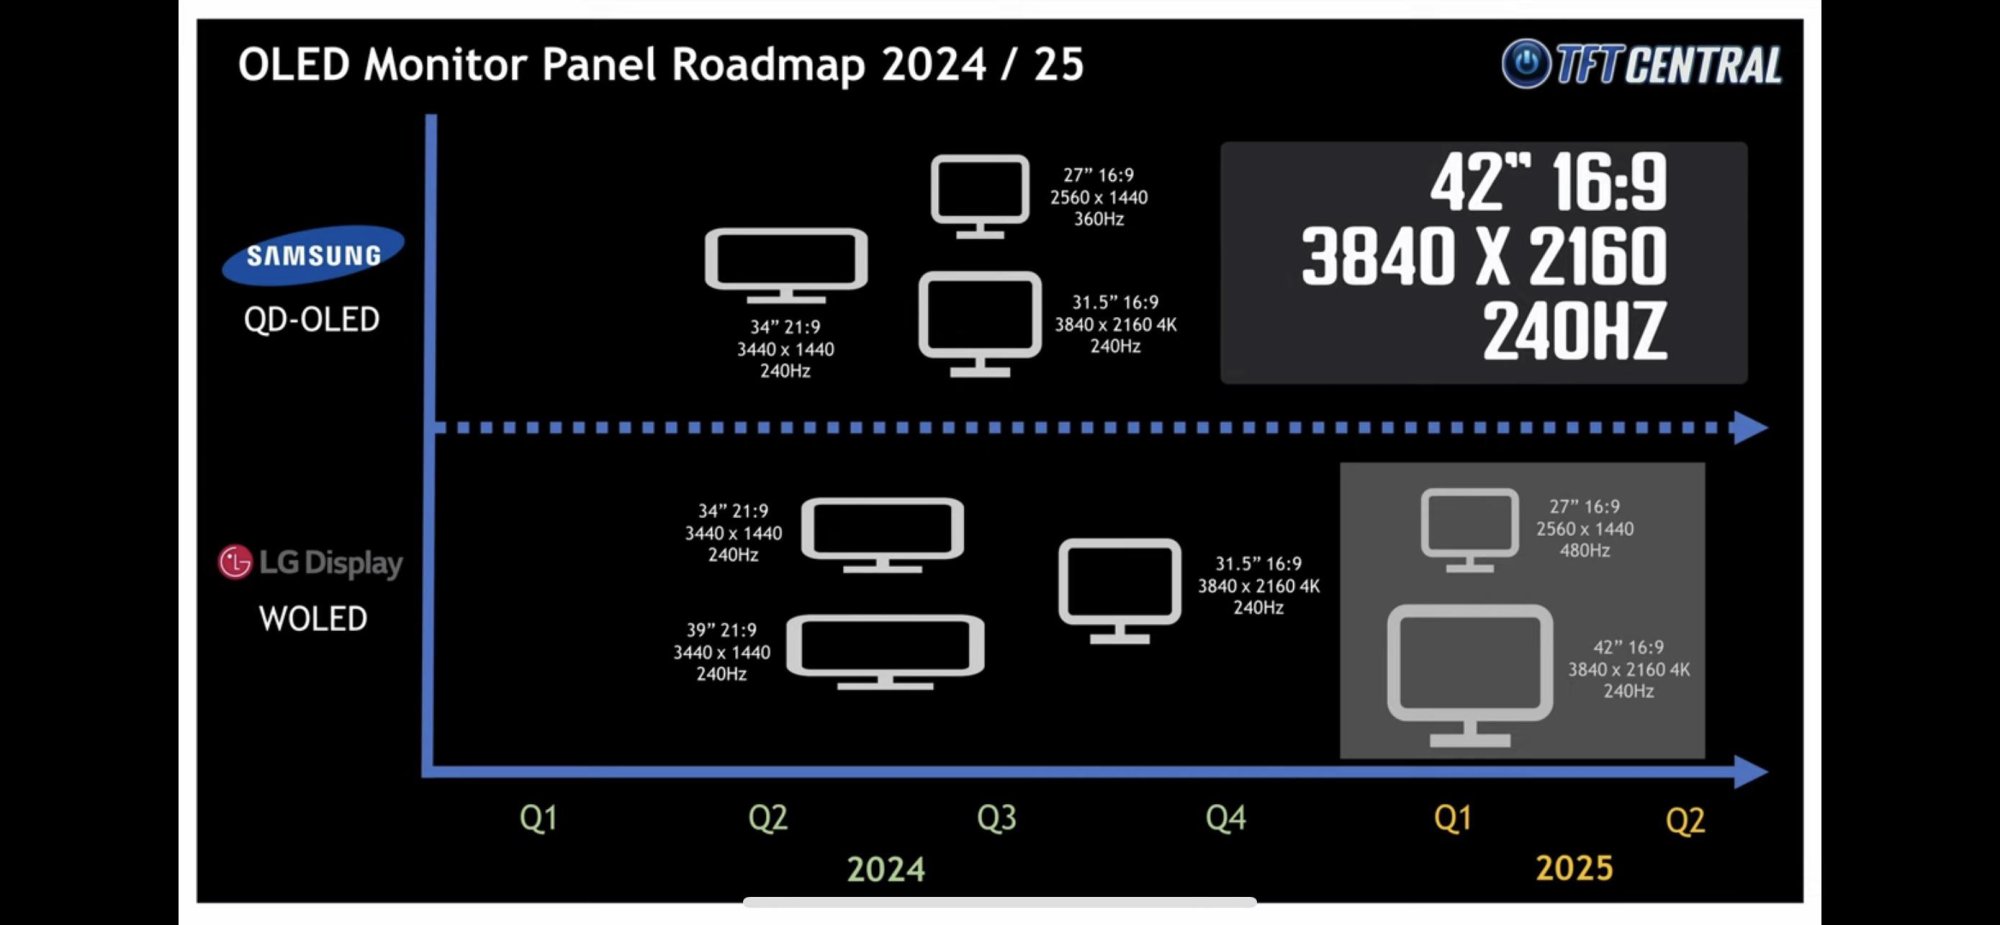 what-are-you-most-excited-for-looking-at-this-oled-roadmap-v0-65f7azdzskfb1.jpg